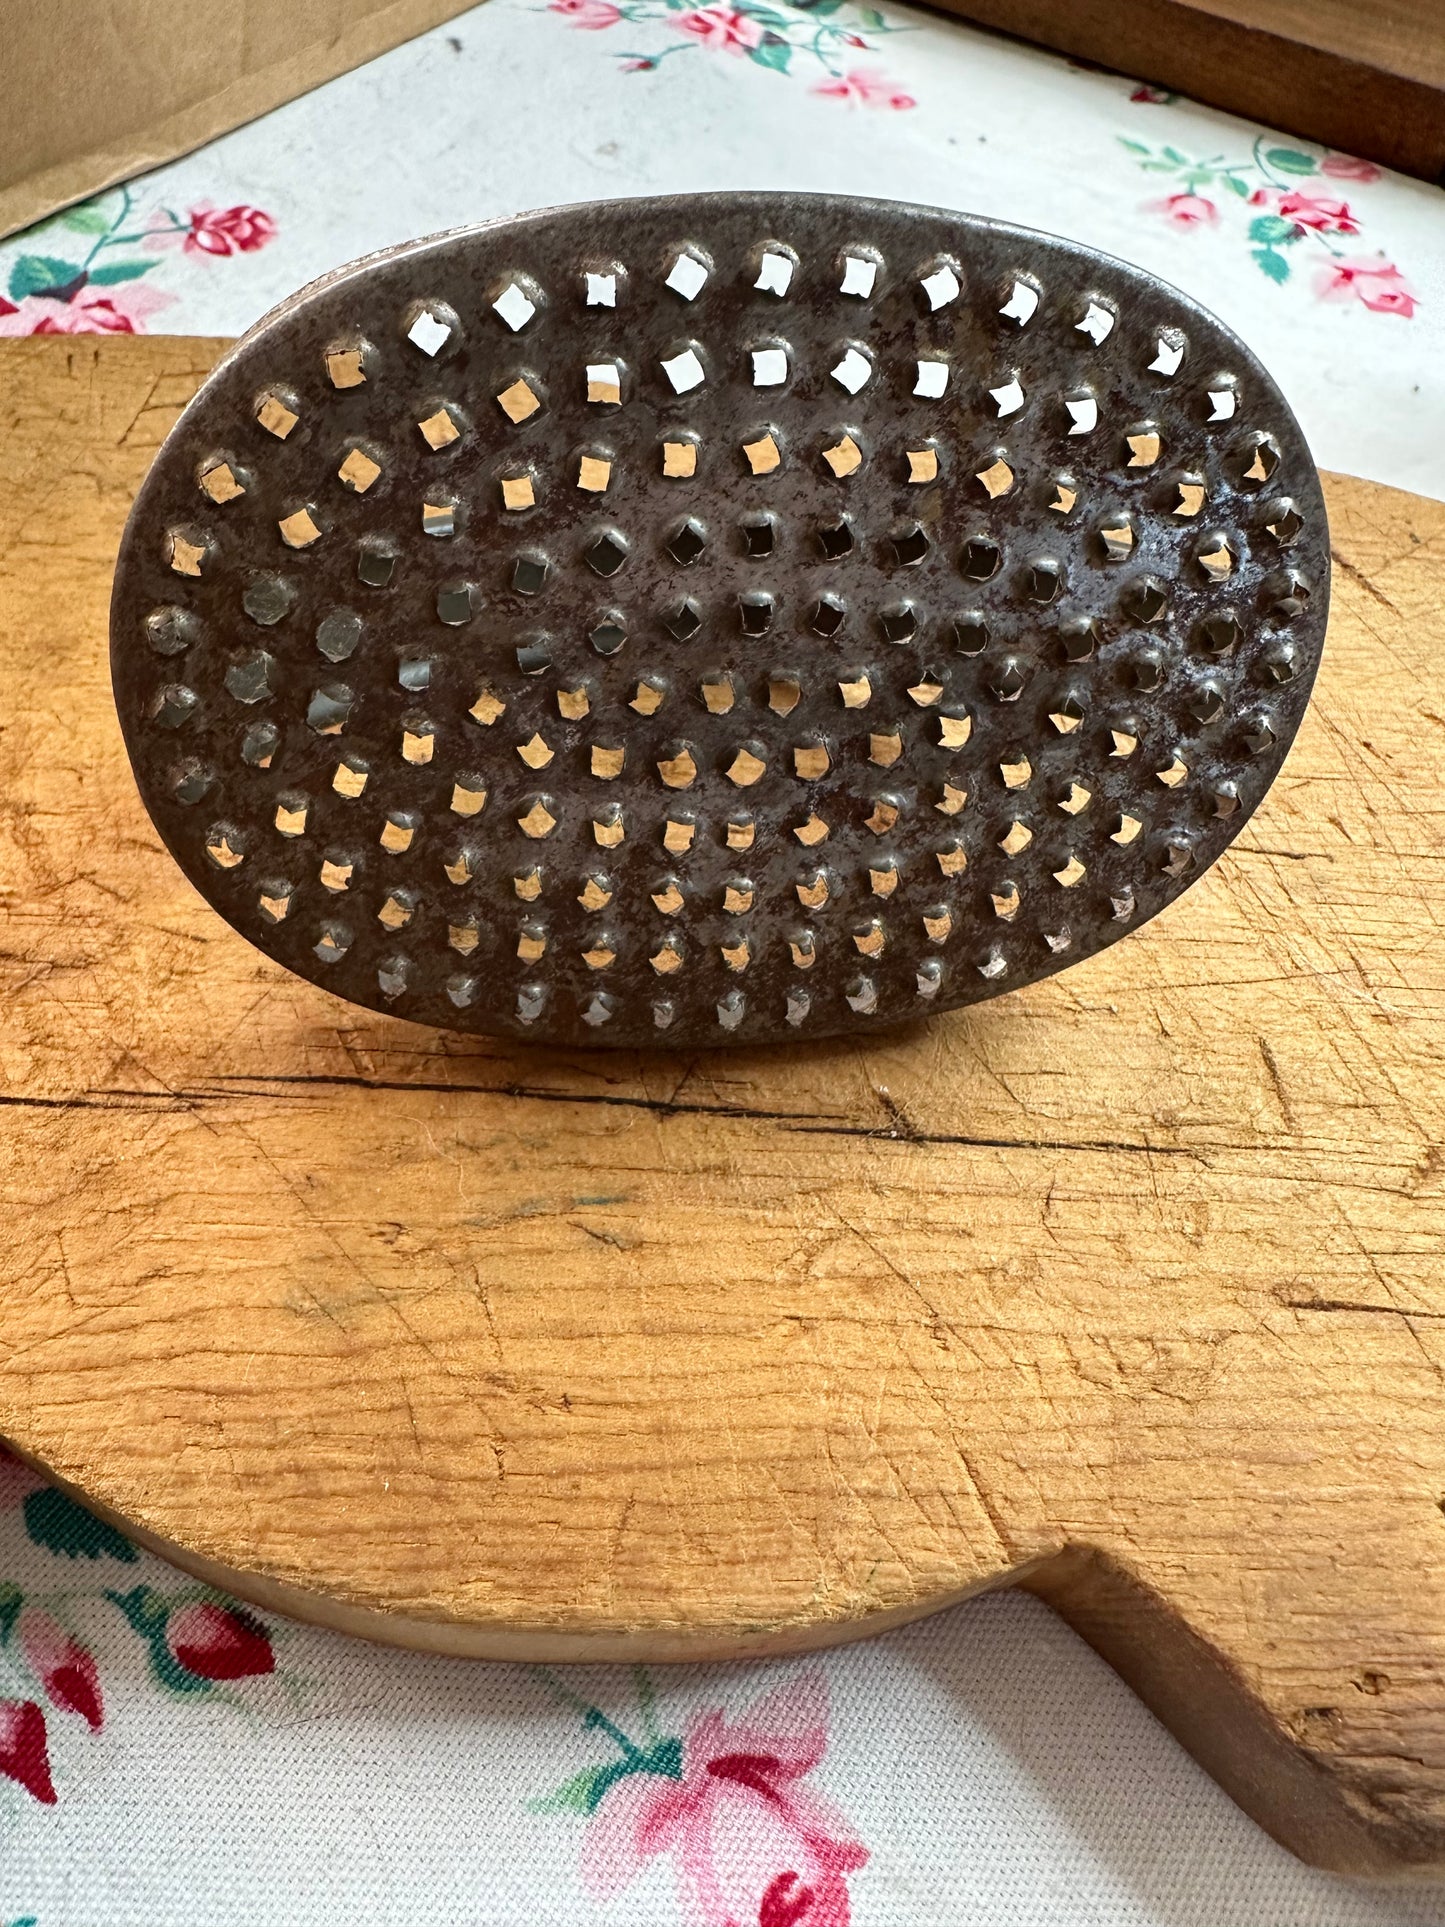 Vintage cheese grater